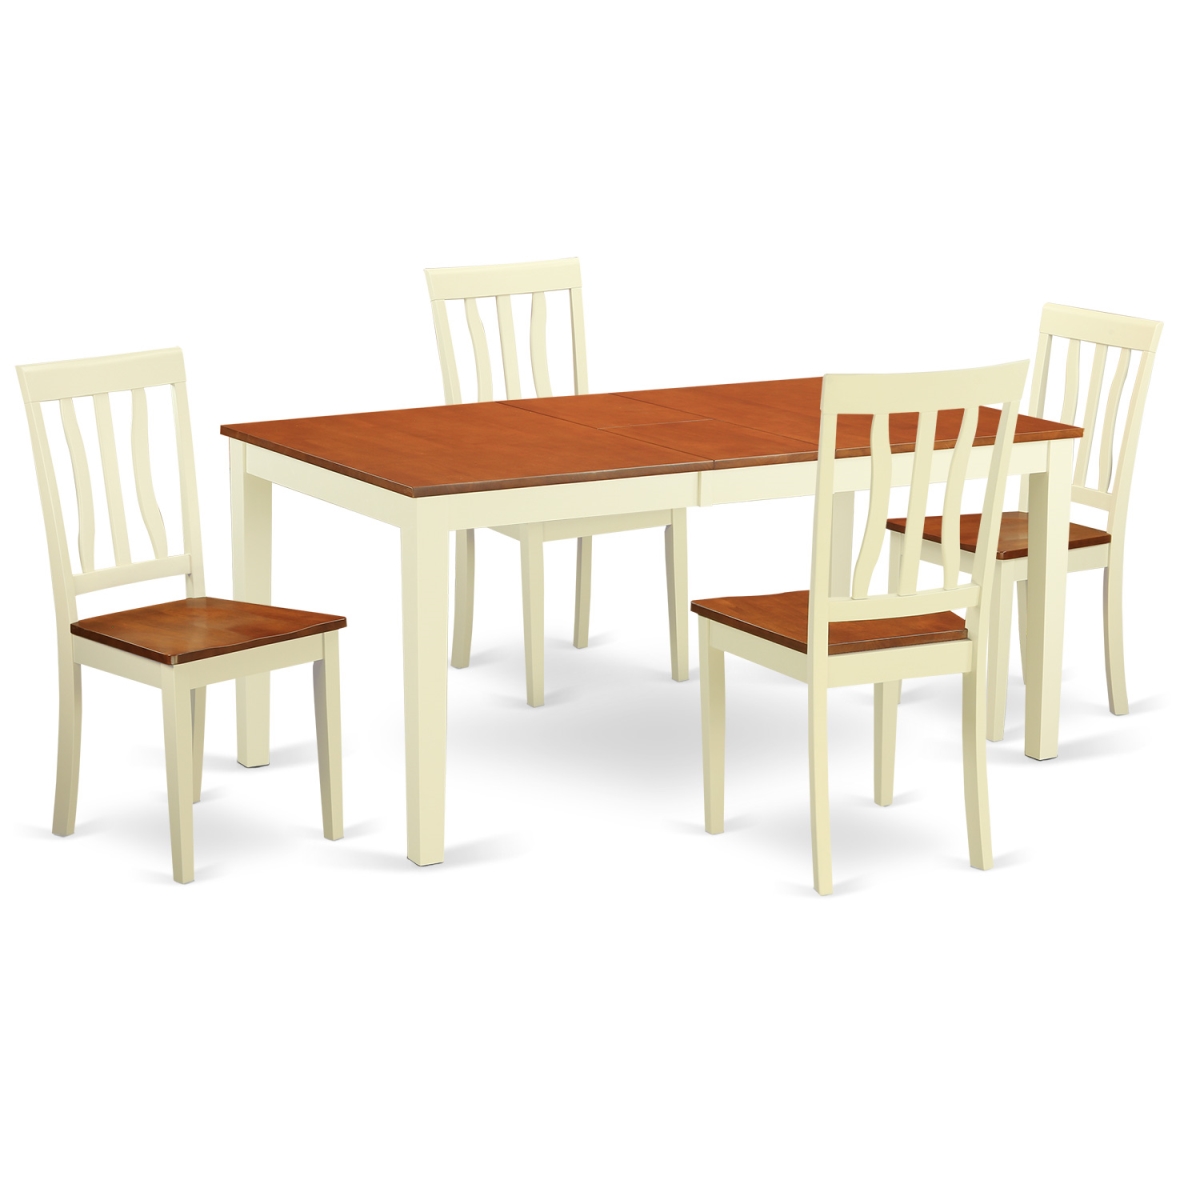 Dinette Table Set - Table & 4 Chairs, Buttermilk & Cherry - 5 Piece